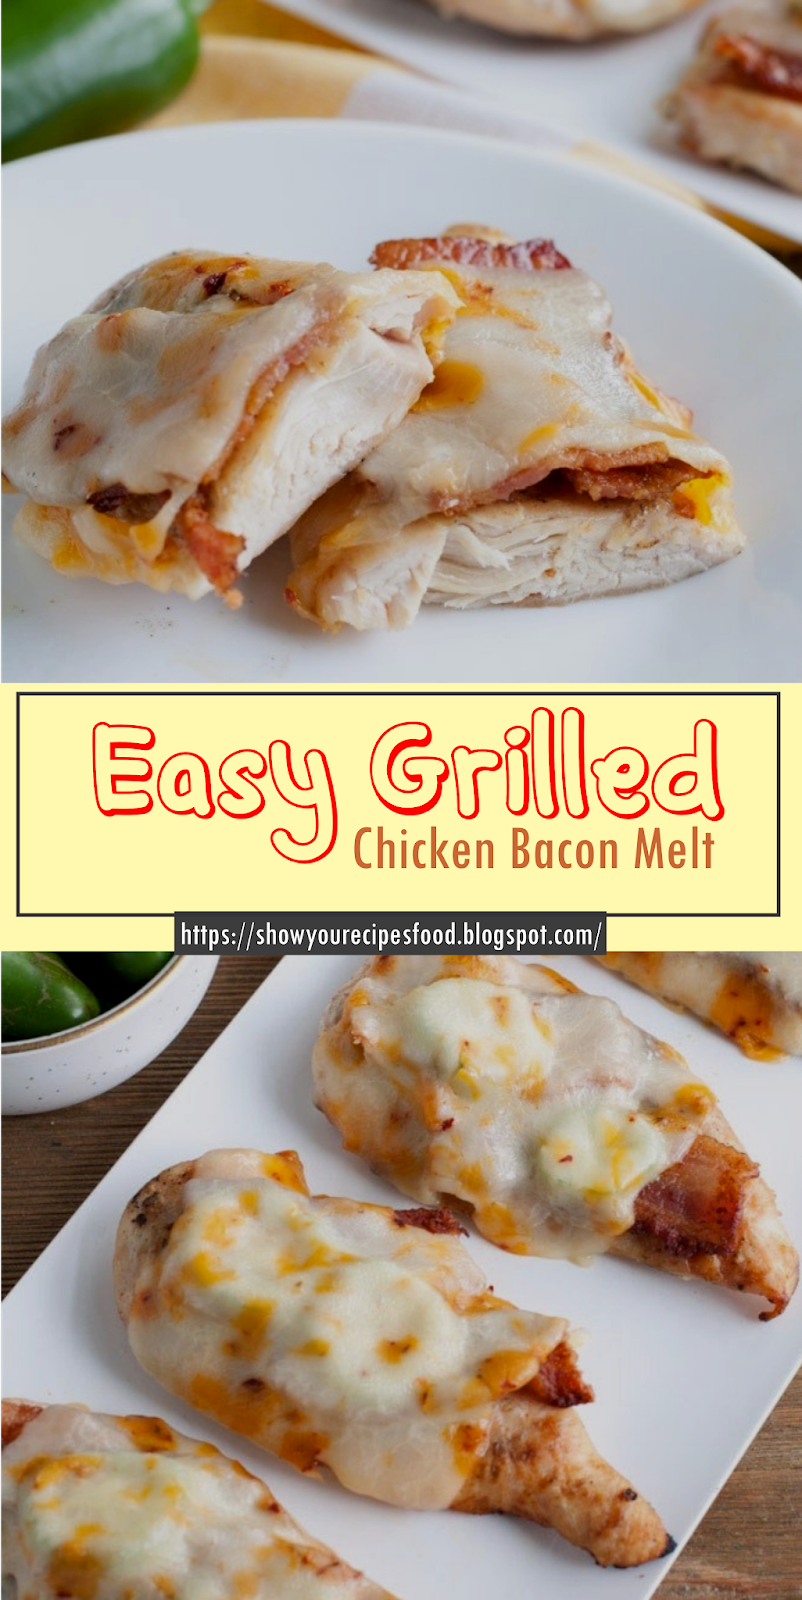 Easy Grilled Chicken Bacon Melt | Show You Recipes